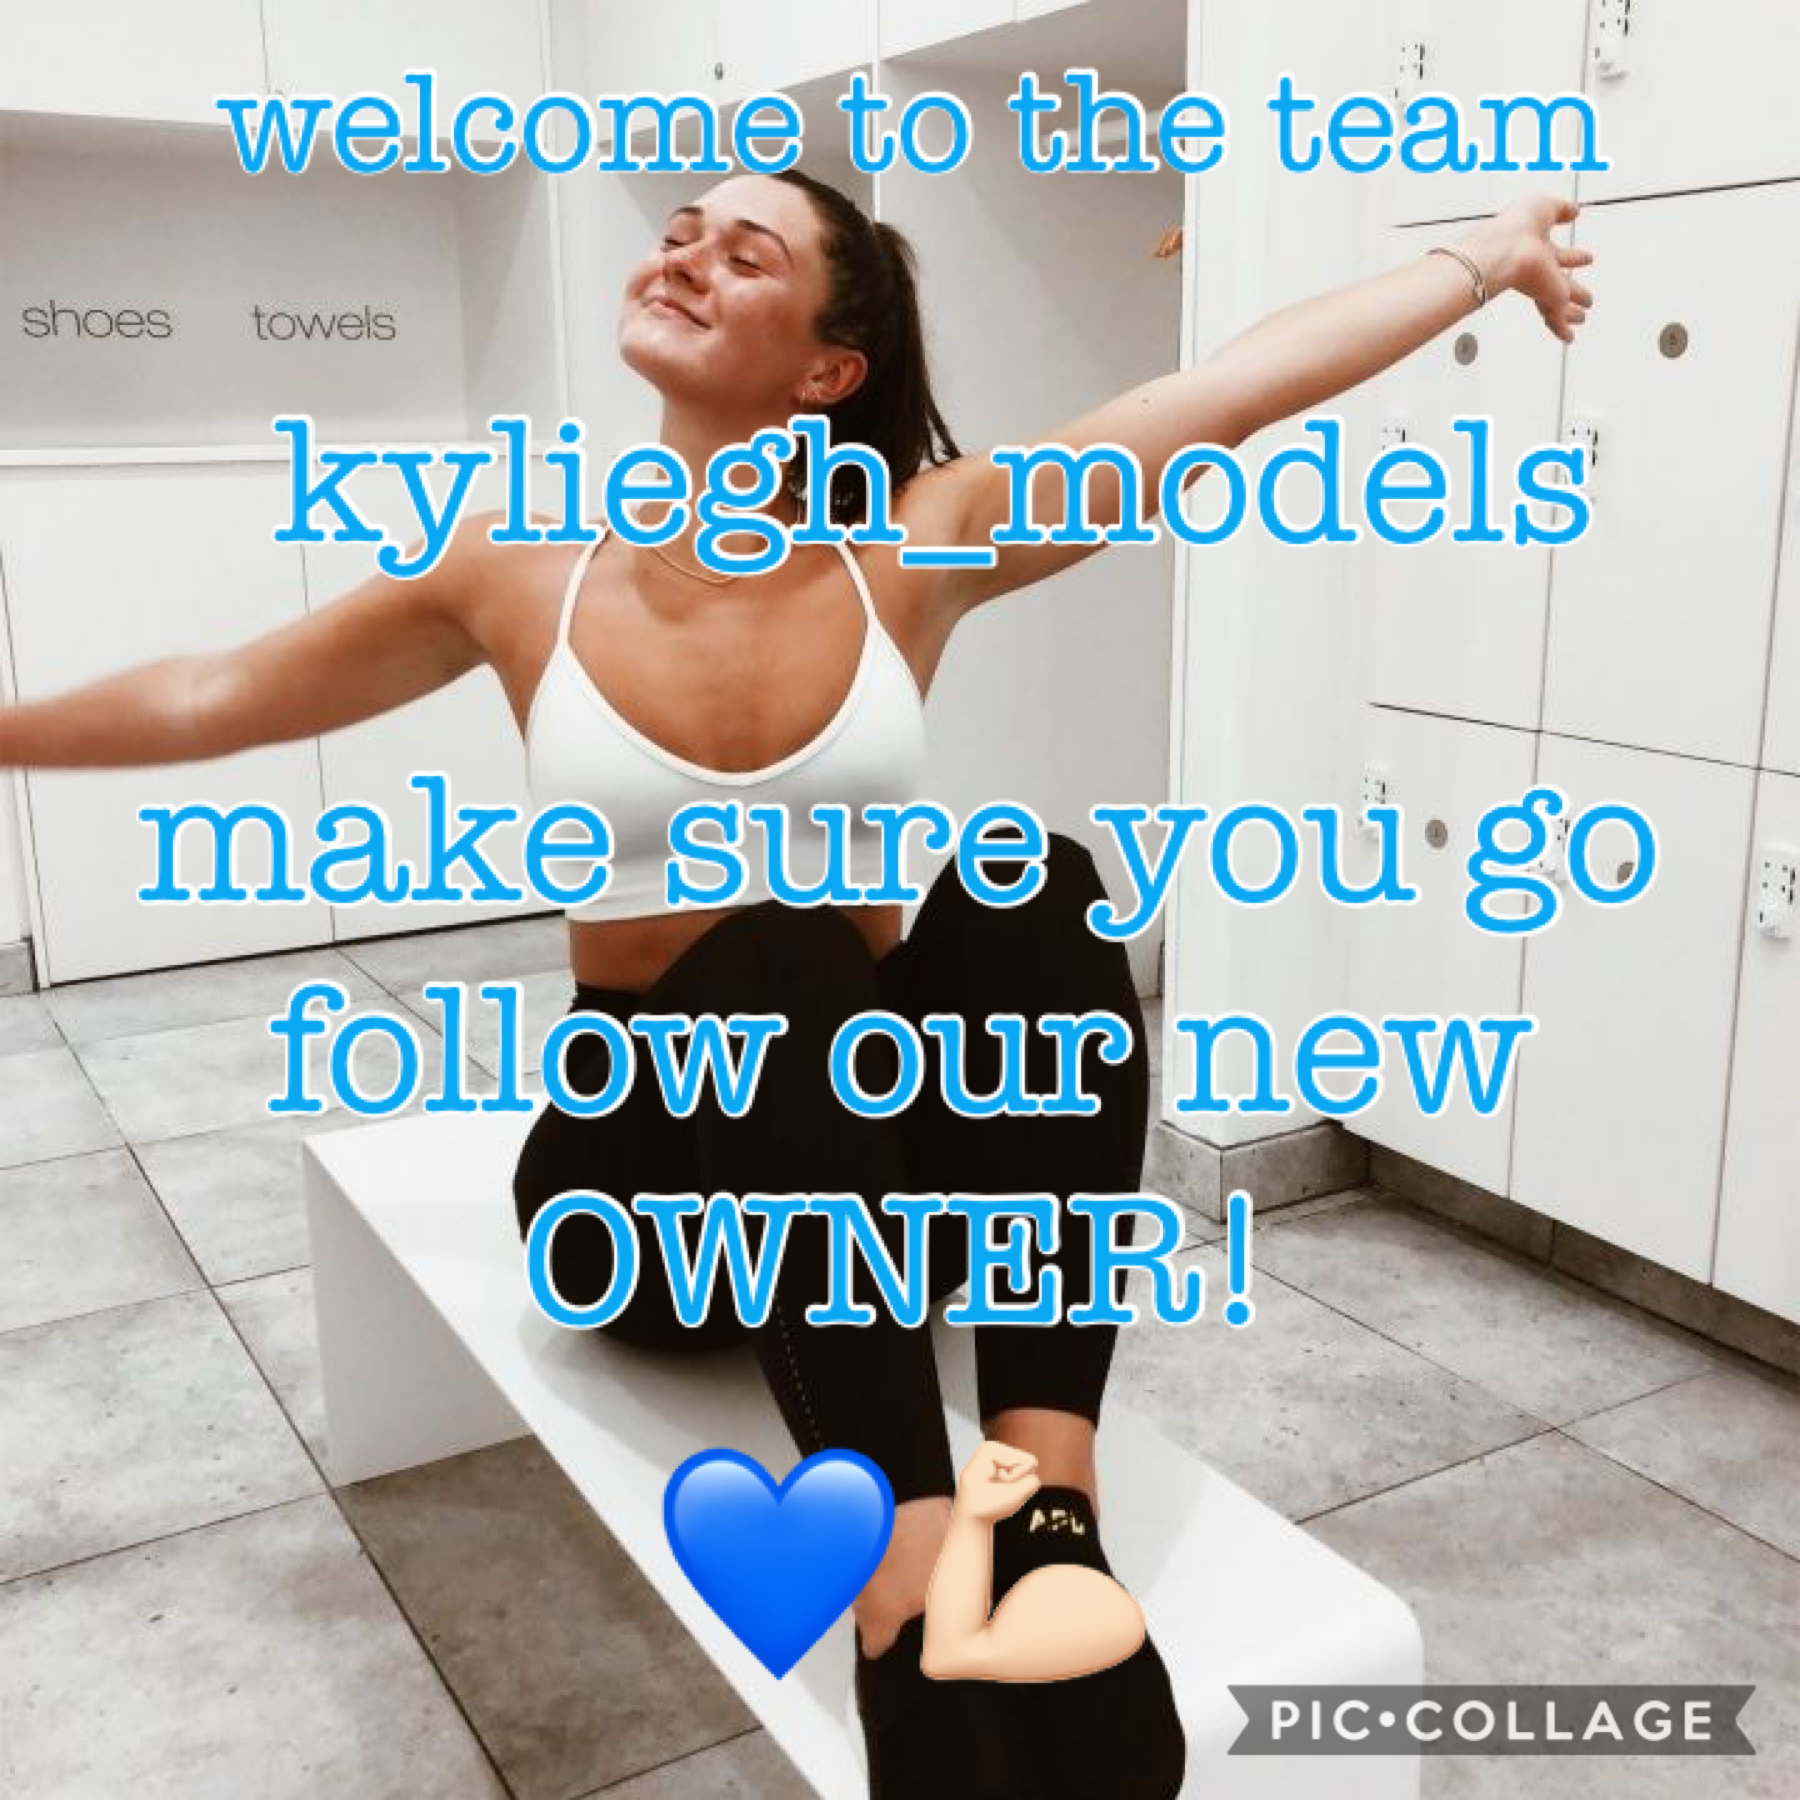 welcome to the team kyliegh!